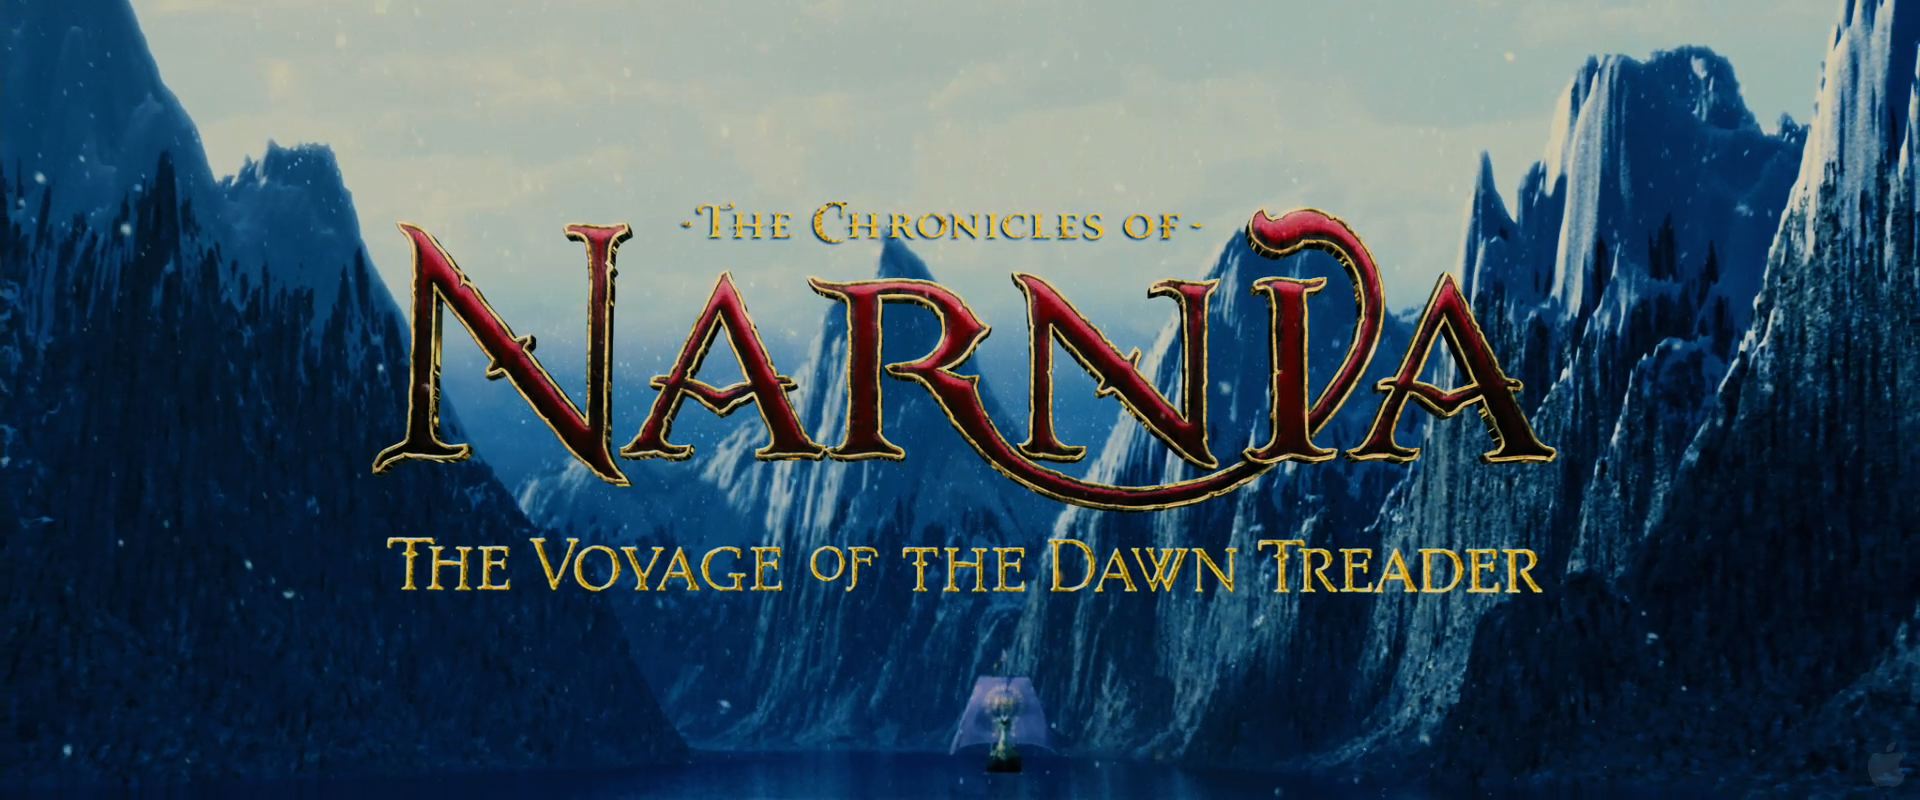 Chronicles Of Narnia Title - HD Wallpaper 